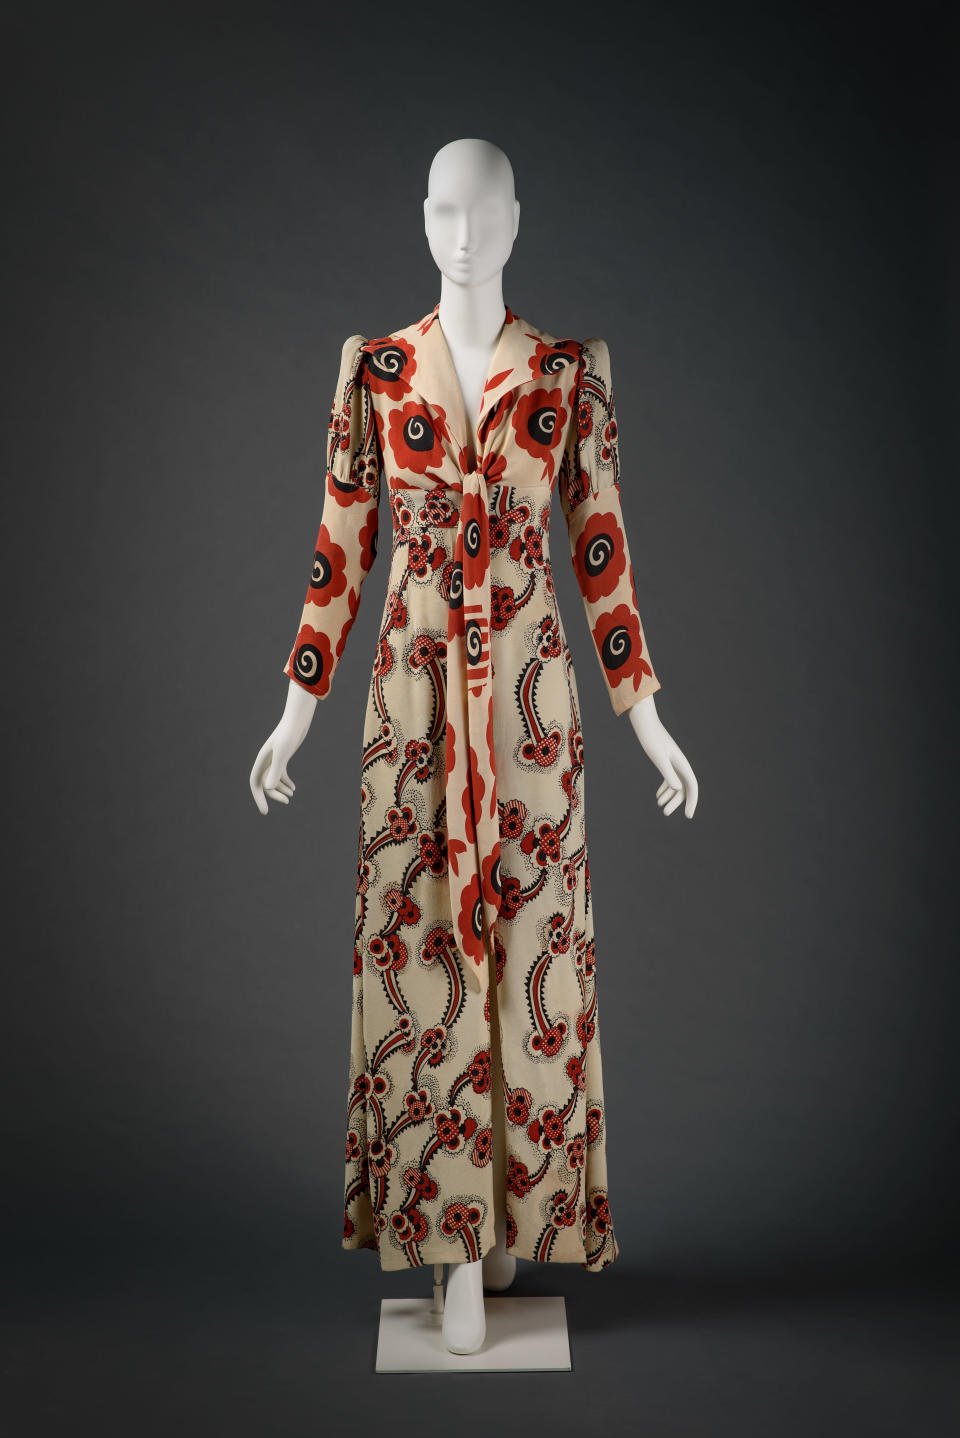 An Ossie Clark dress from 1969. - Credit: courtesy of 10 Corso Como